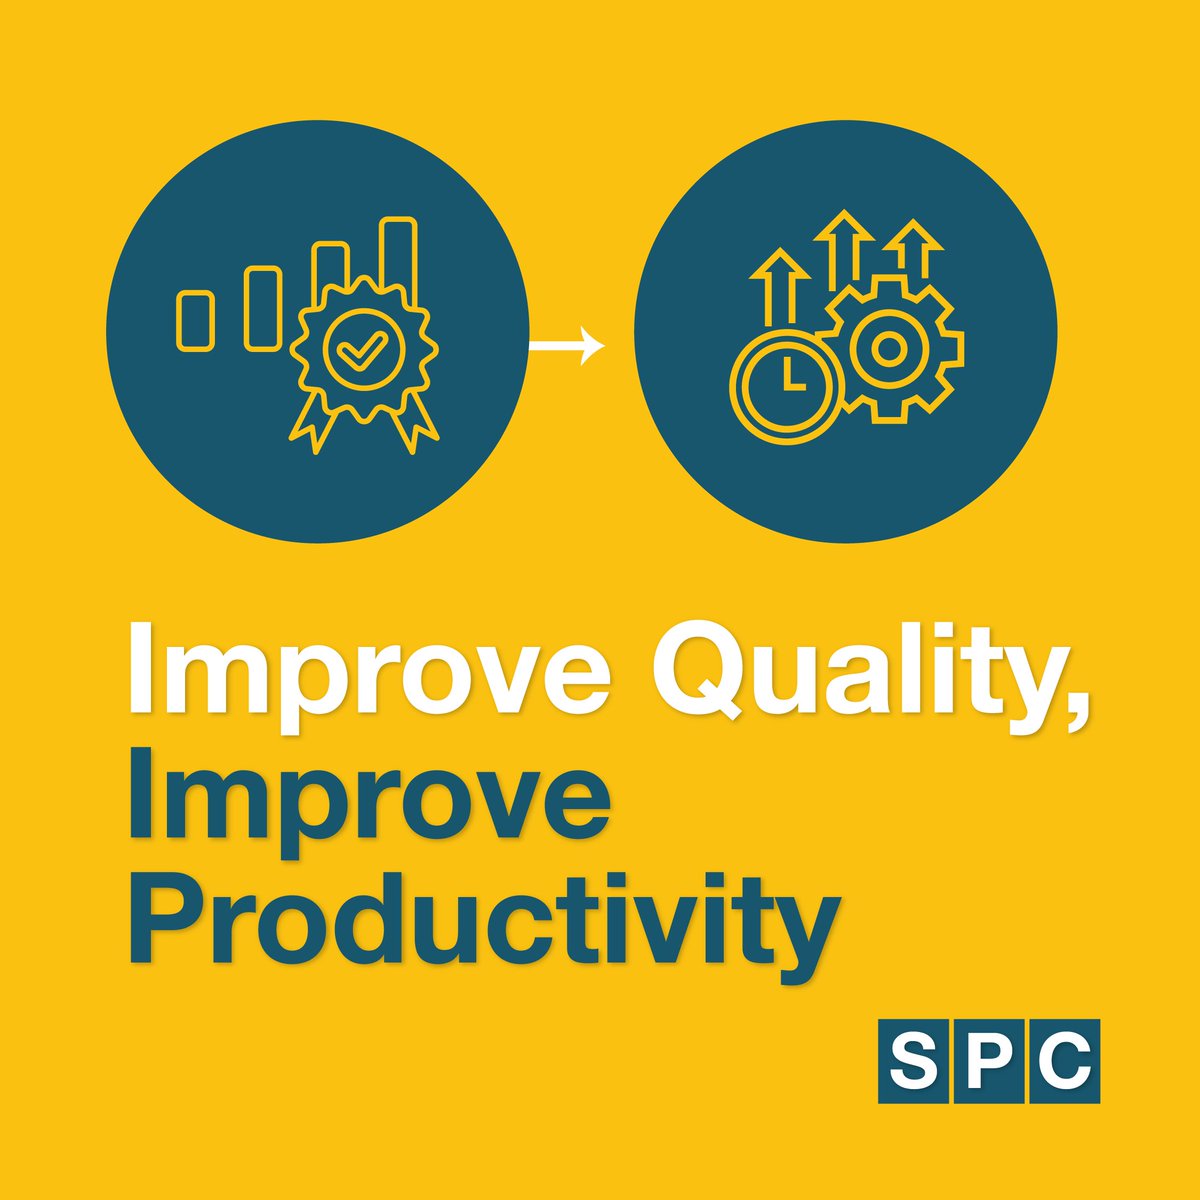 Smart Performance Charts can be implemented quickly and efficiently and have been proven to increase productivity by up to 20%. That’s quality improvement. Here’s a free trial: qimacros.com/trial/30-day 
#qualityimprovement #QI #healthcare #quality